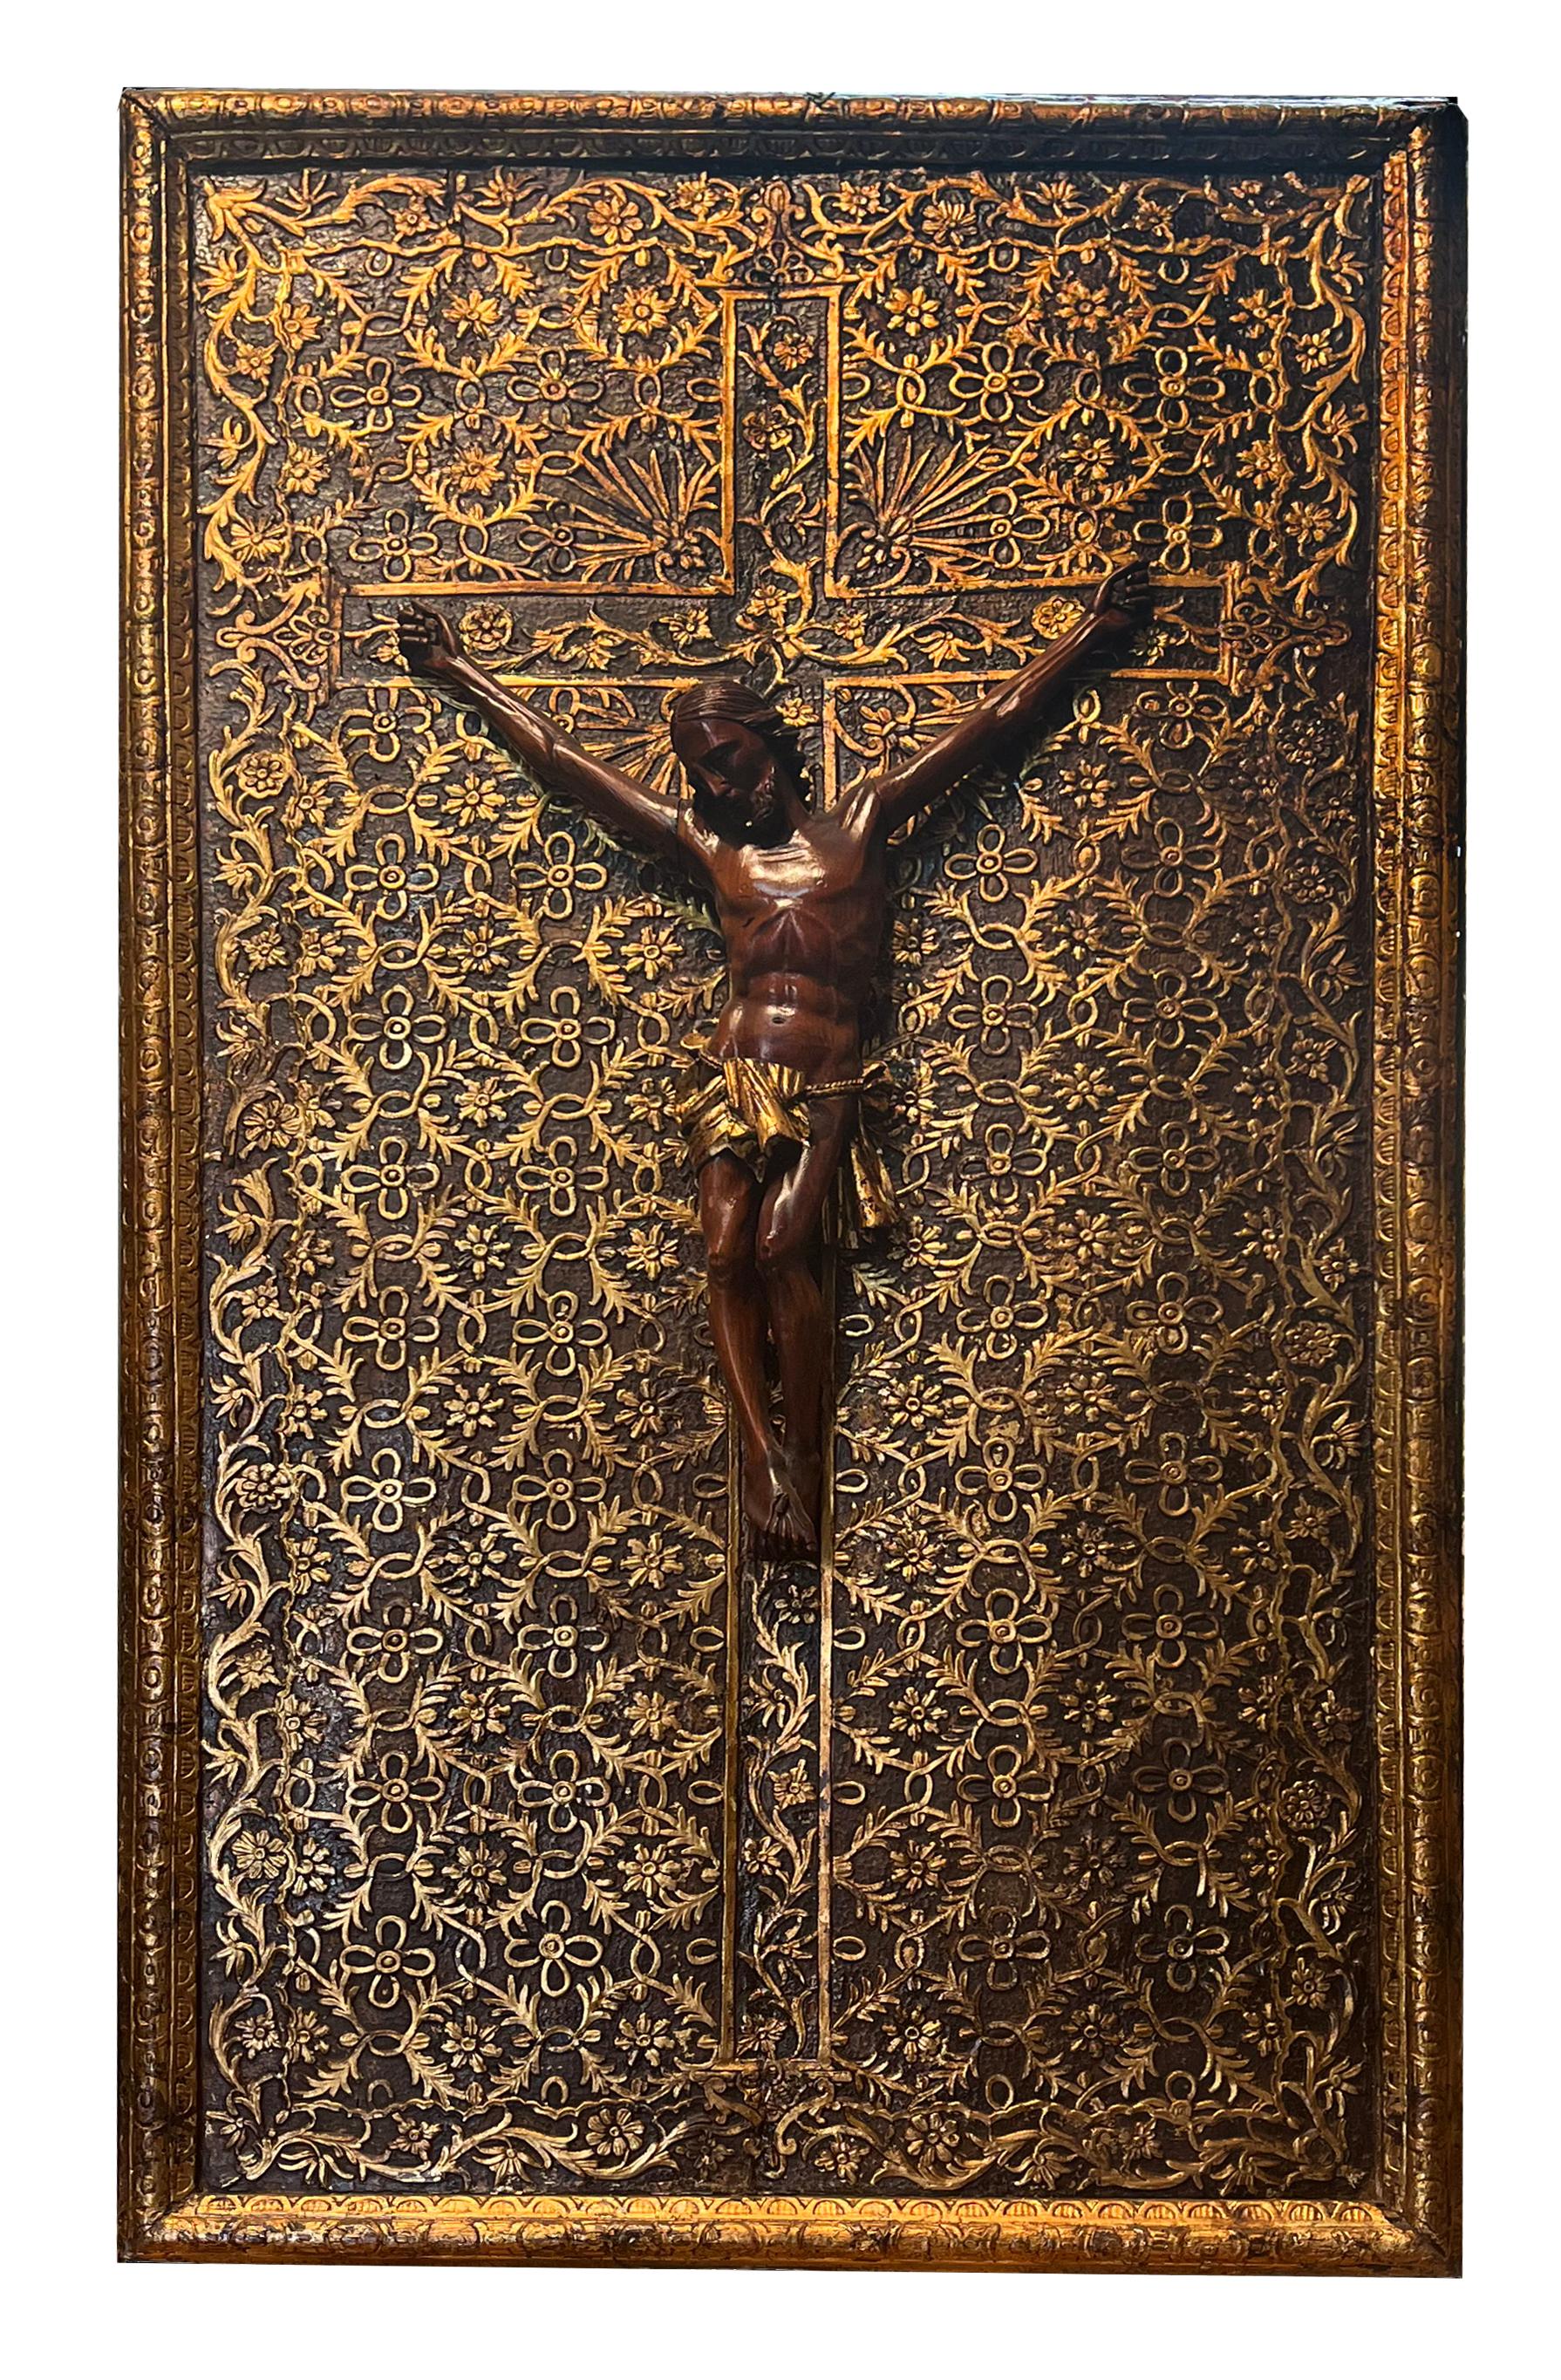 Grand Baroque composition made in Naples in the mid-17th century intended for the private chapel of a noble Neapolitan family. In the early nineteenth century on the finely executed background with gilded decorations in relief was inserted a wooden